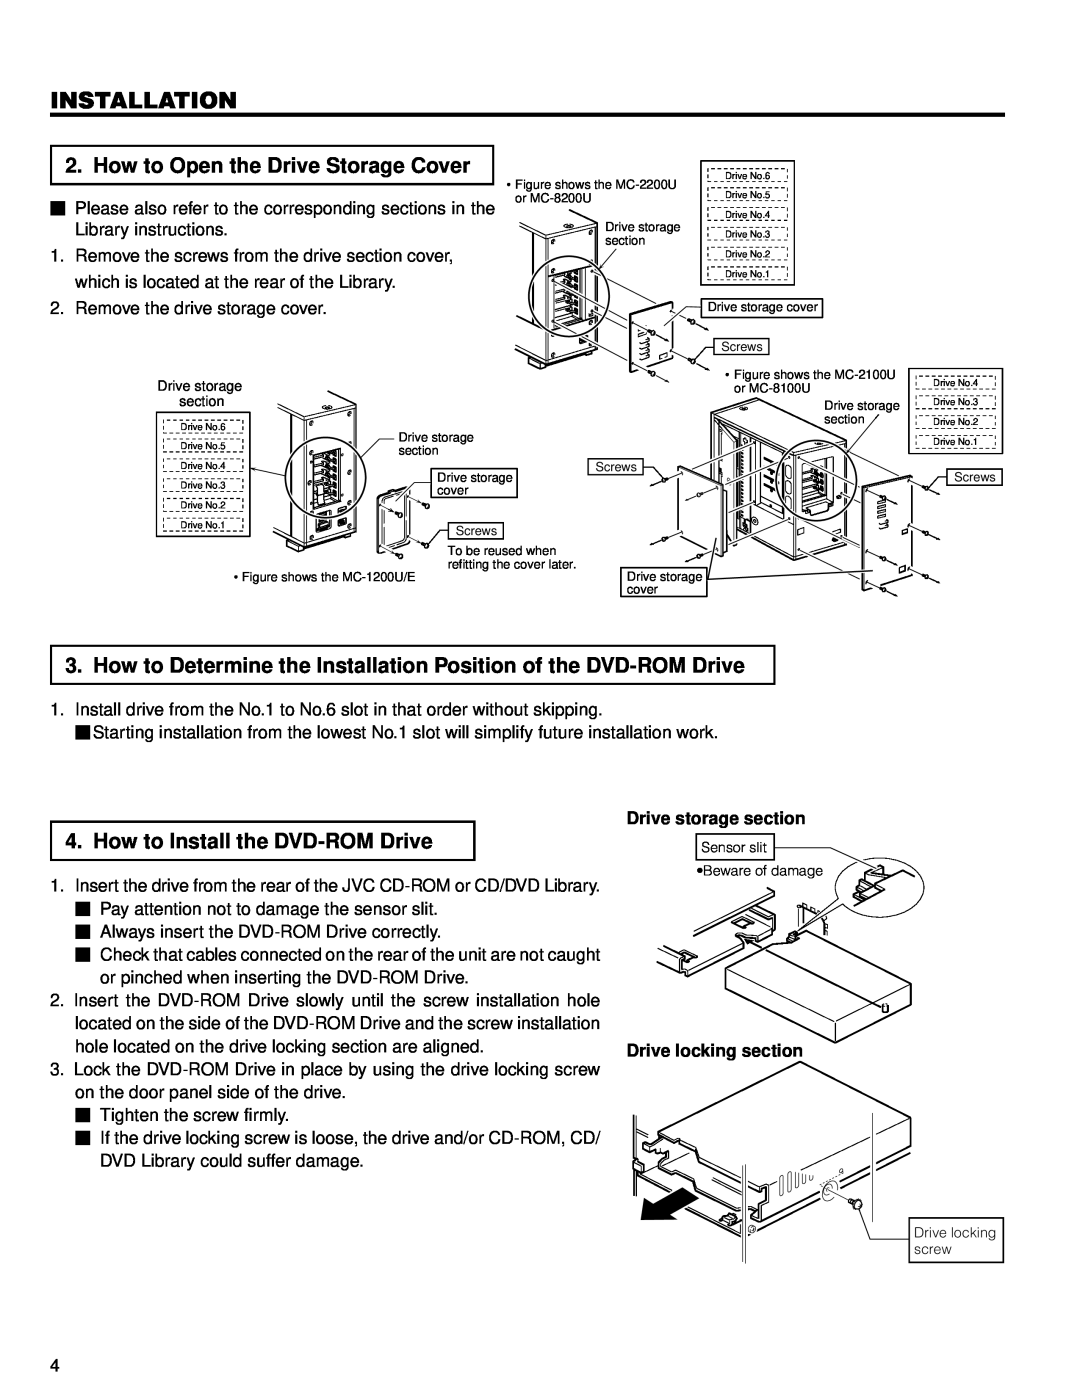 JVC MC-D207U instruction manual Installation, How to Open the Drive Storage Cover, How to Install the DVD-ROM Drive 